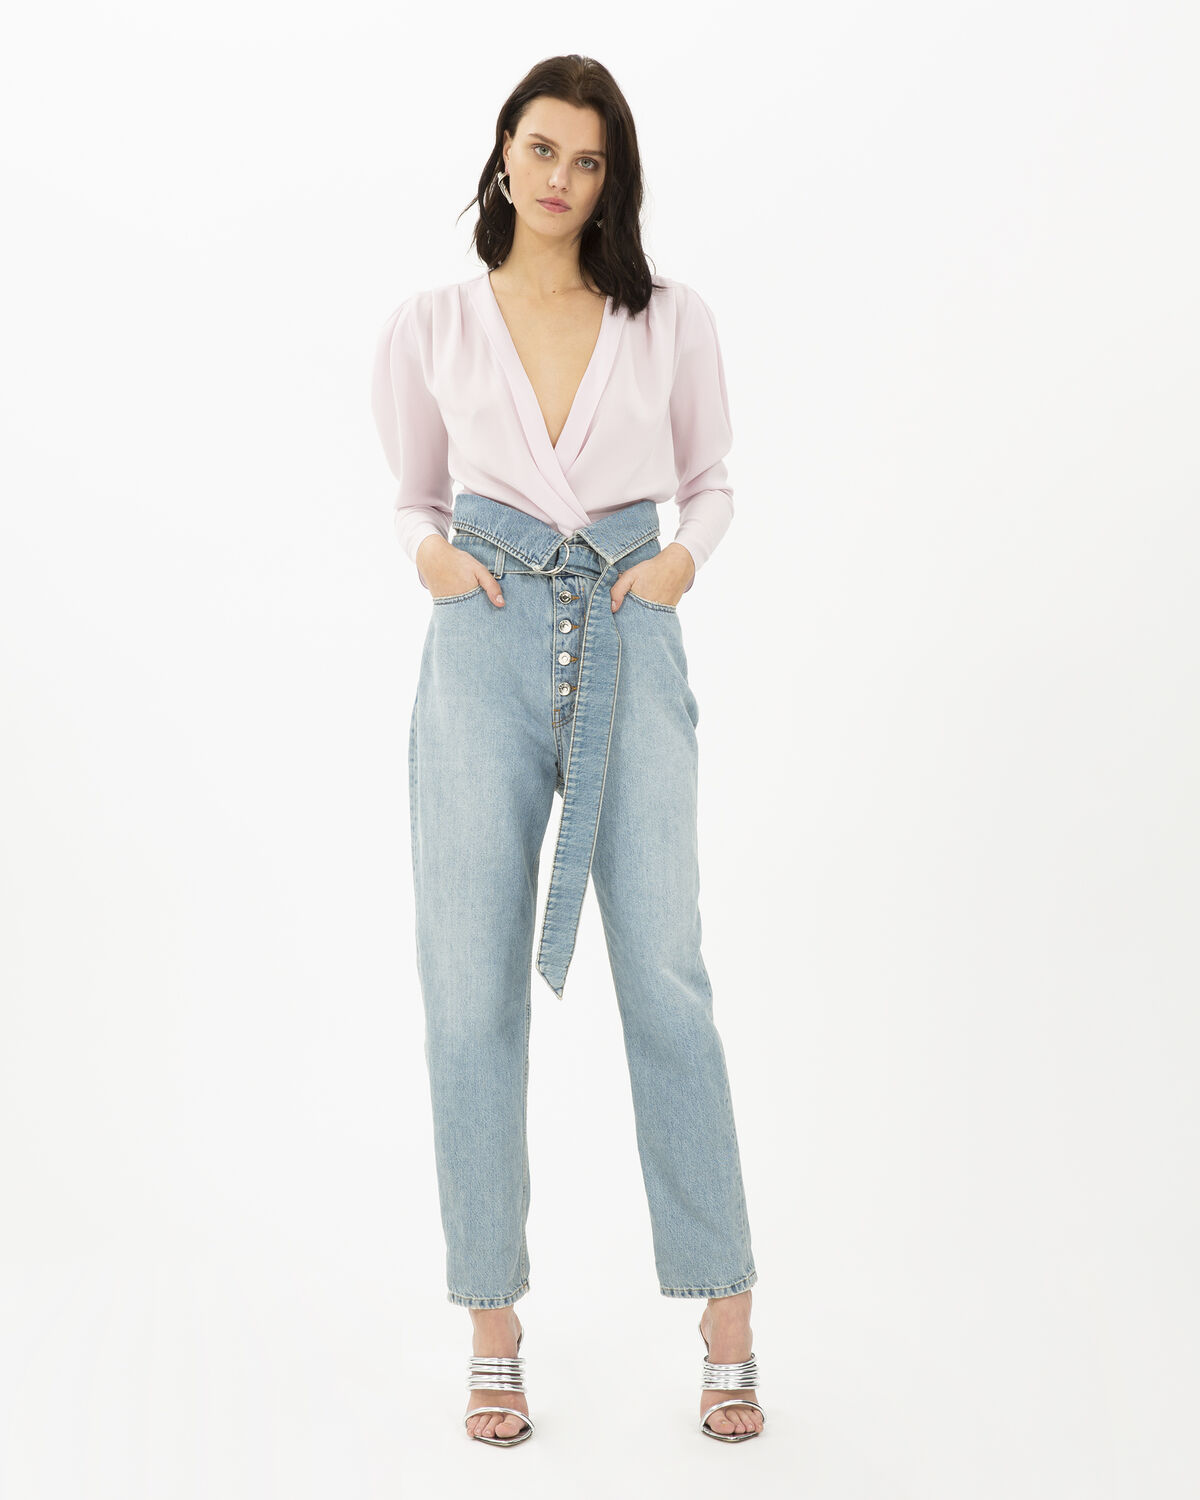 Photo of IRO Paris Fasti Jeans Light Denim - These Jeans Are Enhanced By Their High Waist With A Double Buckle Belt. Strong Pieces Of The Season, They Are Distinguished By Their Flaps At The Belt Level. Wear Them With A Pair Of Boots And A Leather Top For A Rock And Resolutely Modern Look. Denim